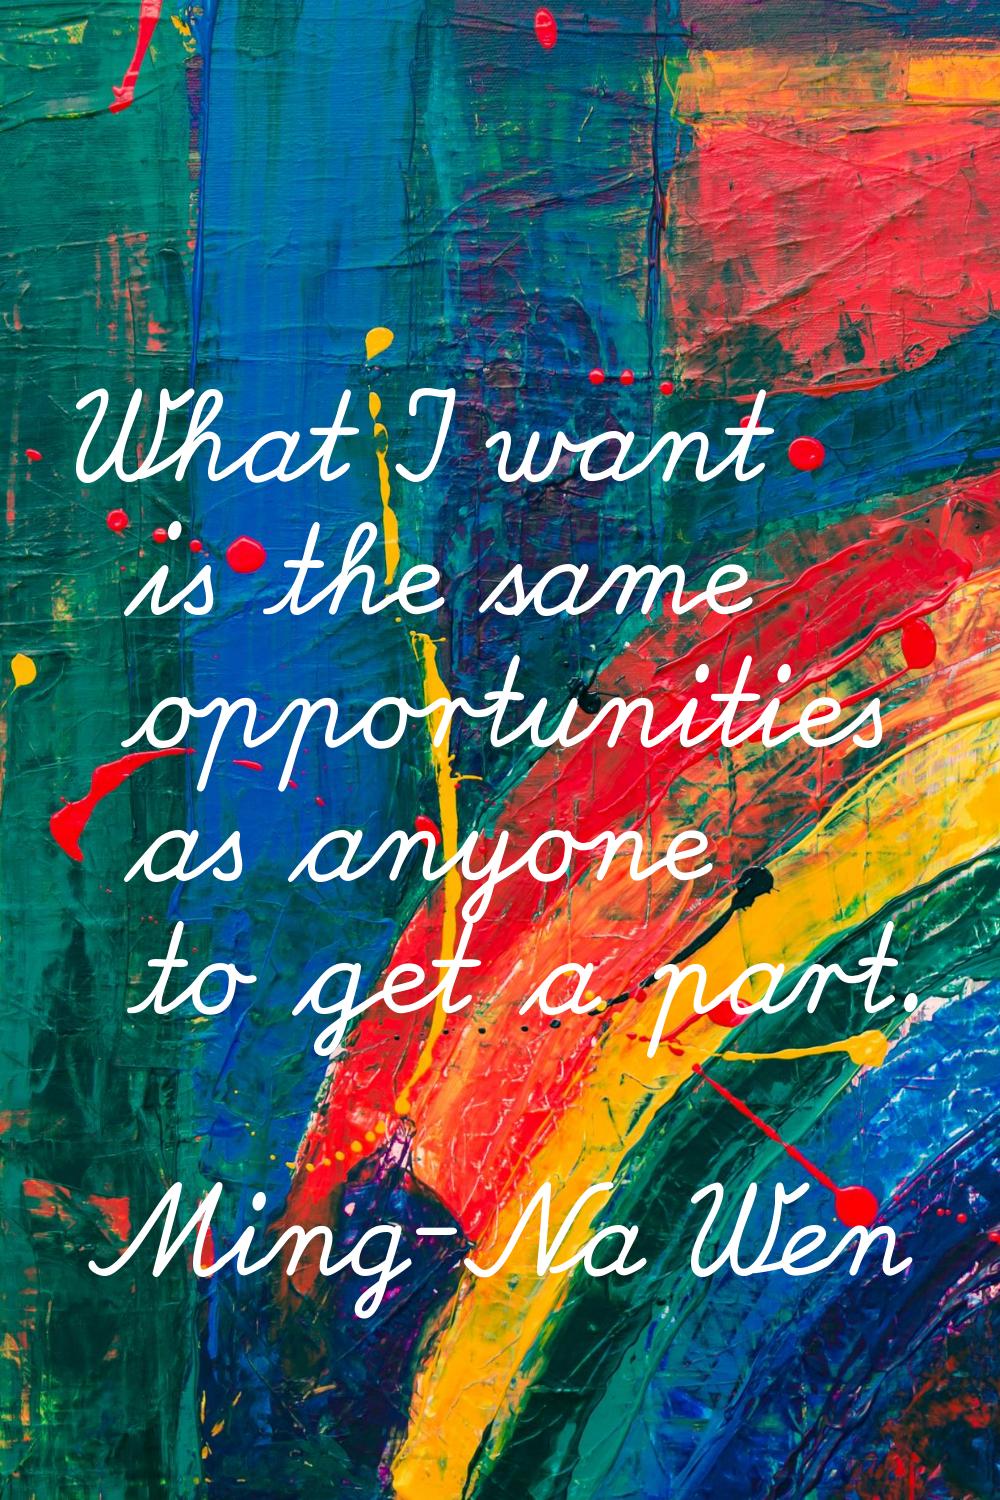 What I want is the same opportunities as anyone to get a part.